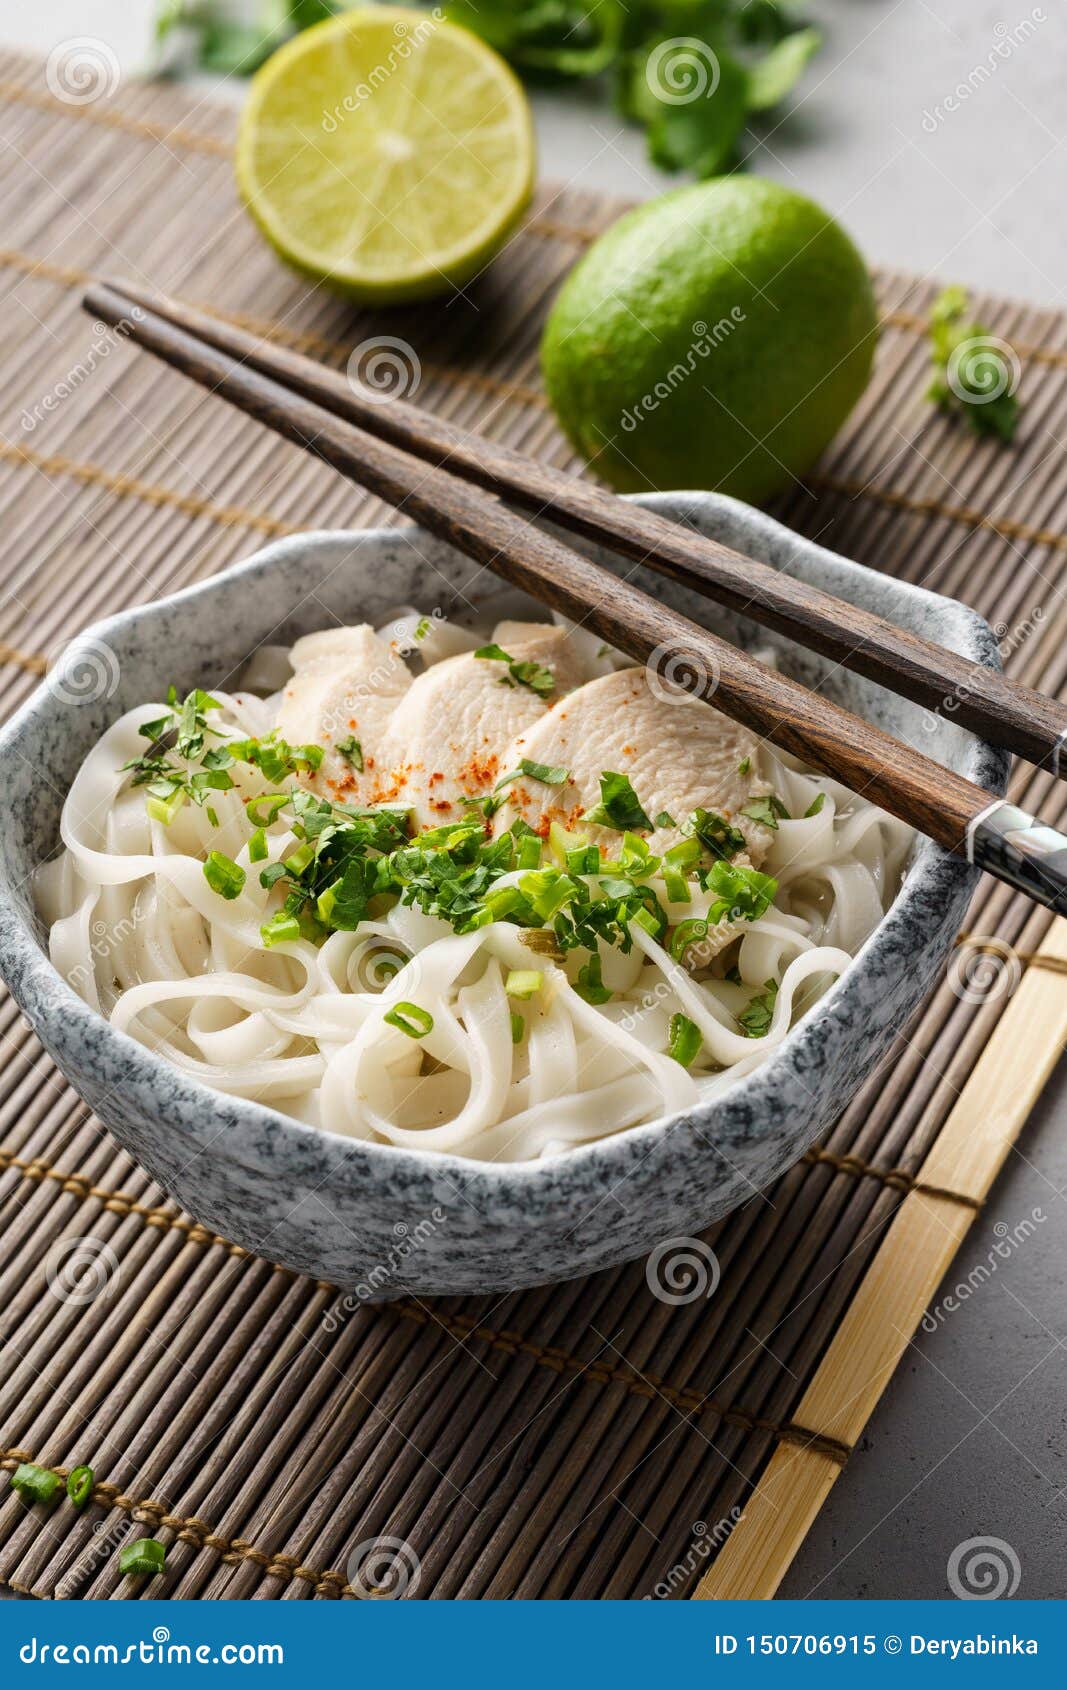 Pho Ga, Vietnamese Chicken Rice Noodle Soup Stock Image - Image of ...